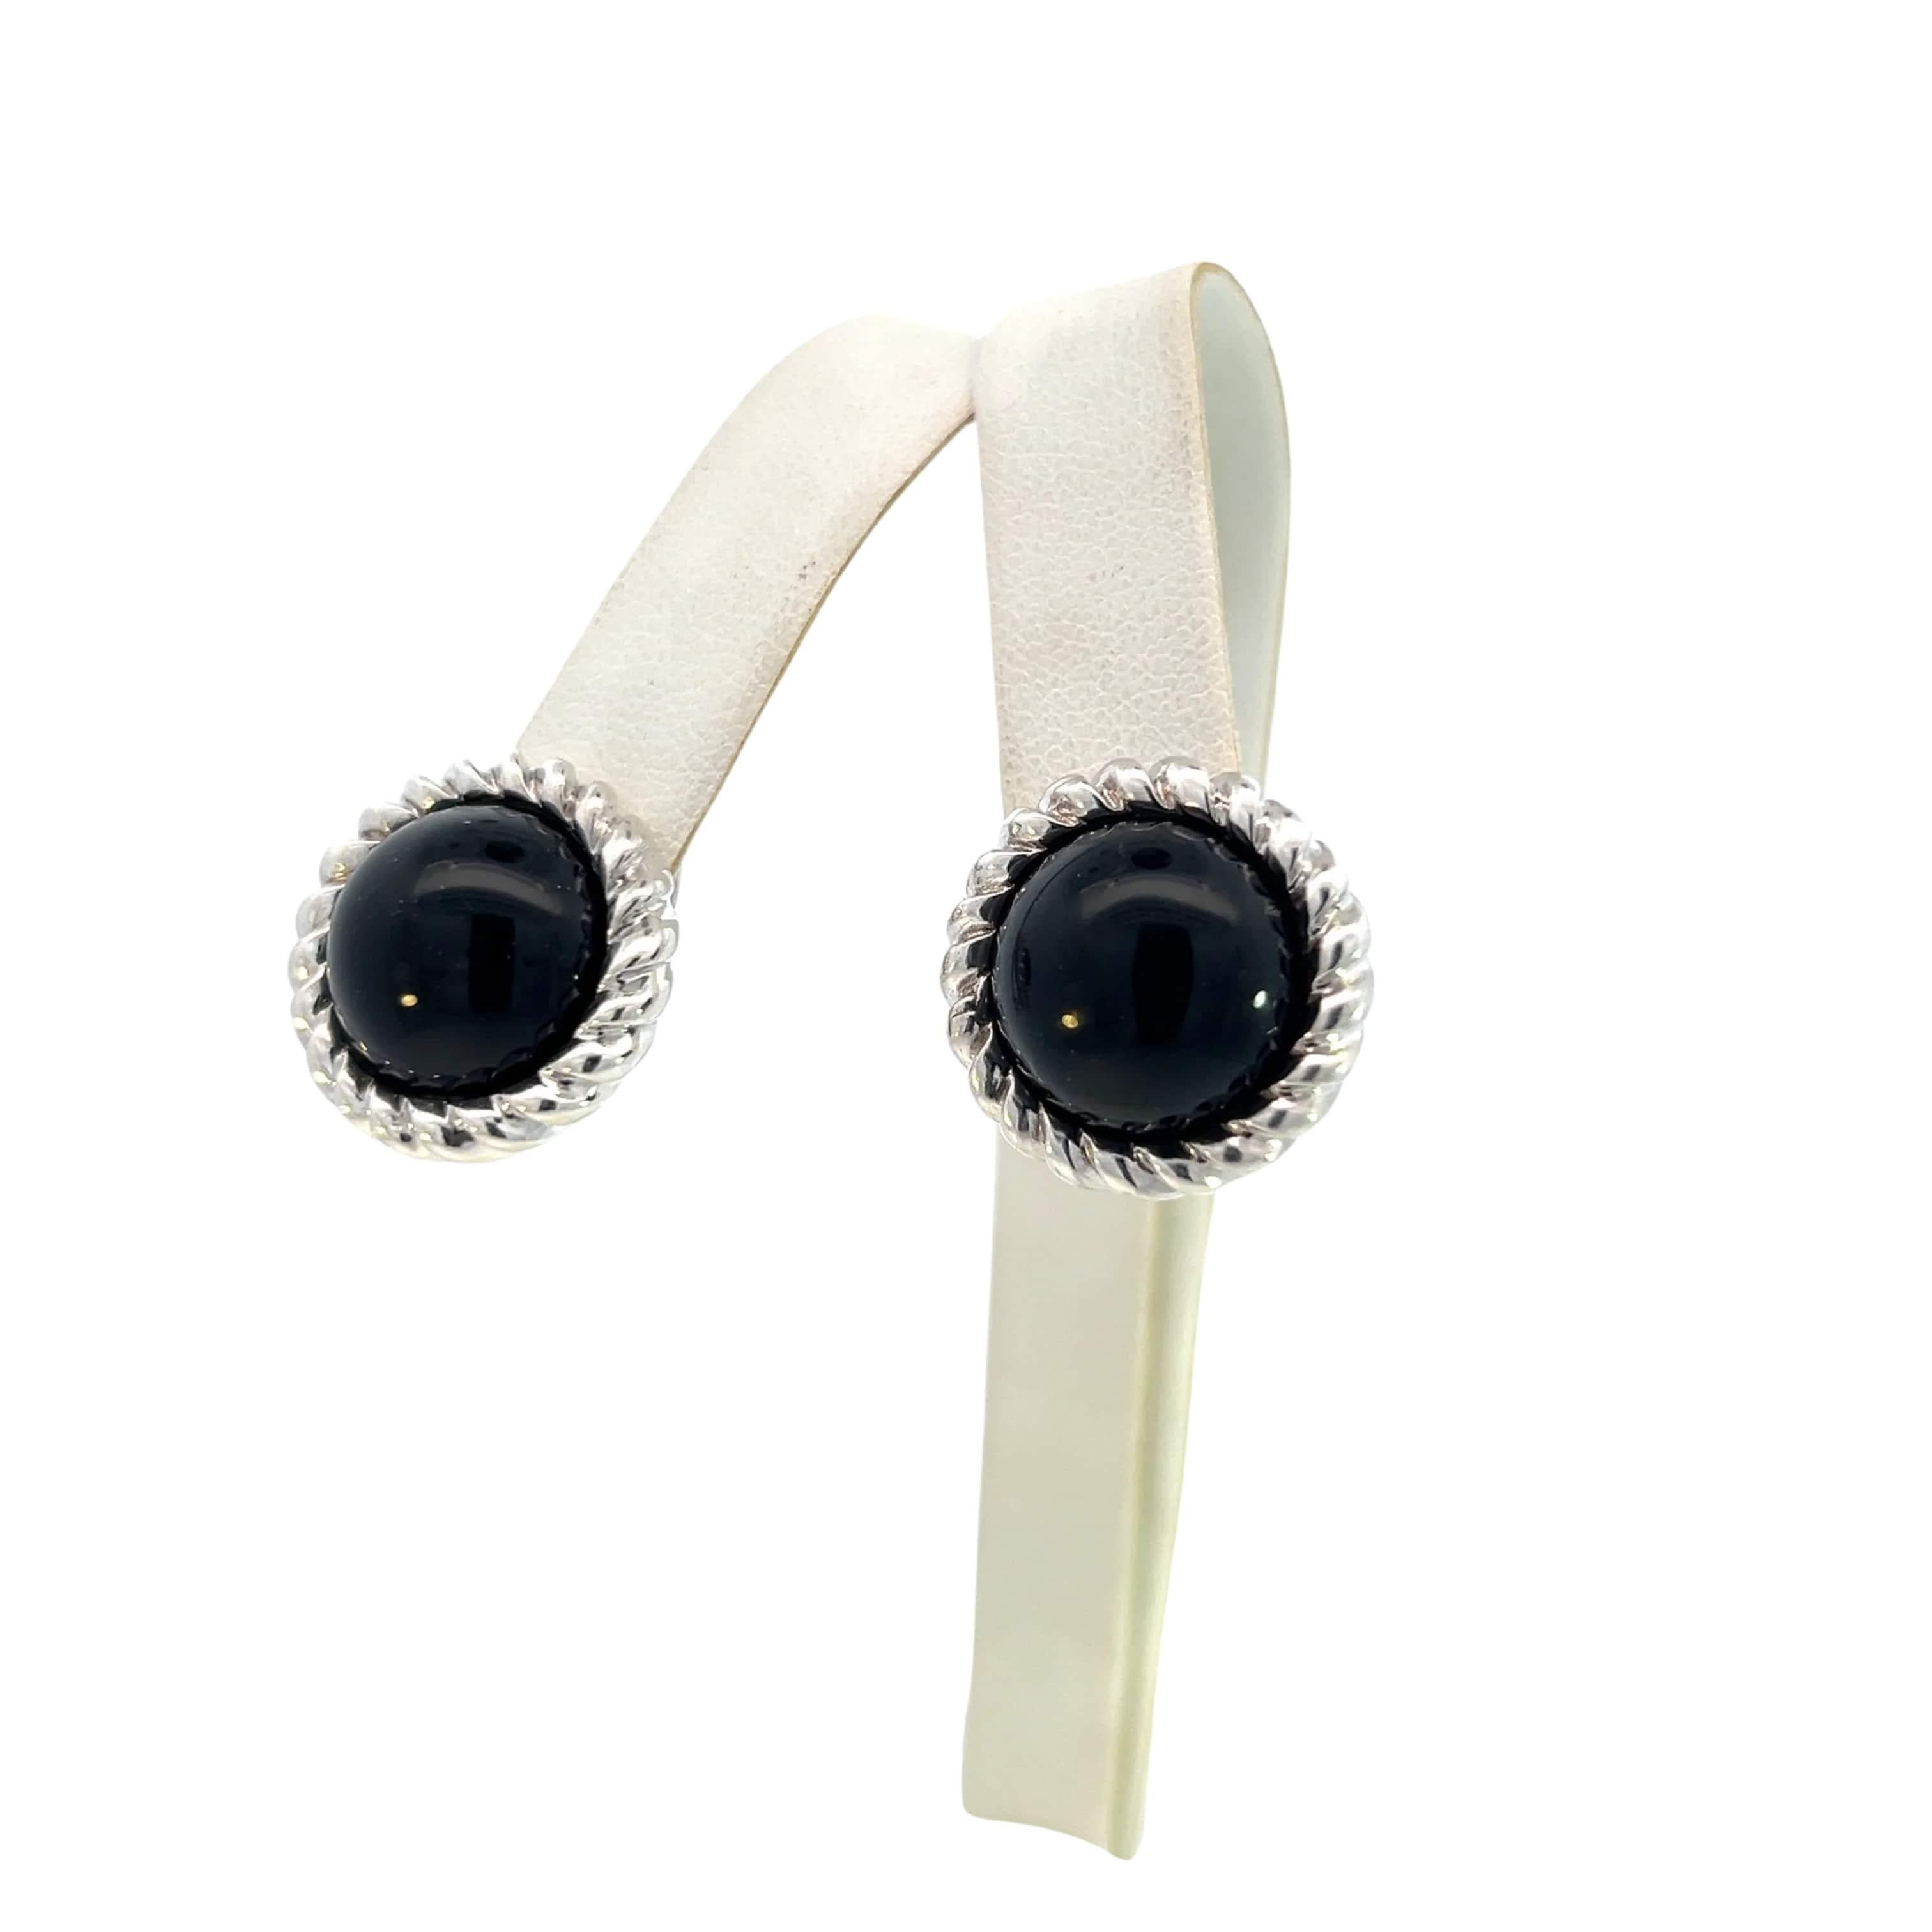 Authentic Tiffany & Co Estate Round Onyx Clip-on Earrings Sterling Silver 11.8 Grams TIF562

These elegant Authentic Tiffany & Co Earrings are made of sterling silver and have a weight of 11.8 grams.

TRUSTED SELLER SINCE 2002

PLEASE SEE OUR